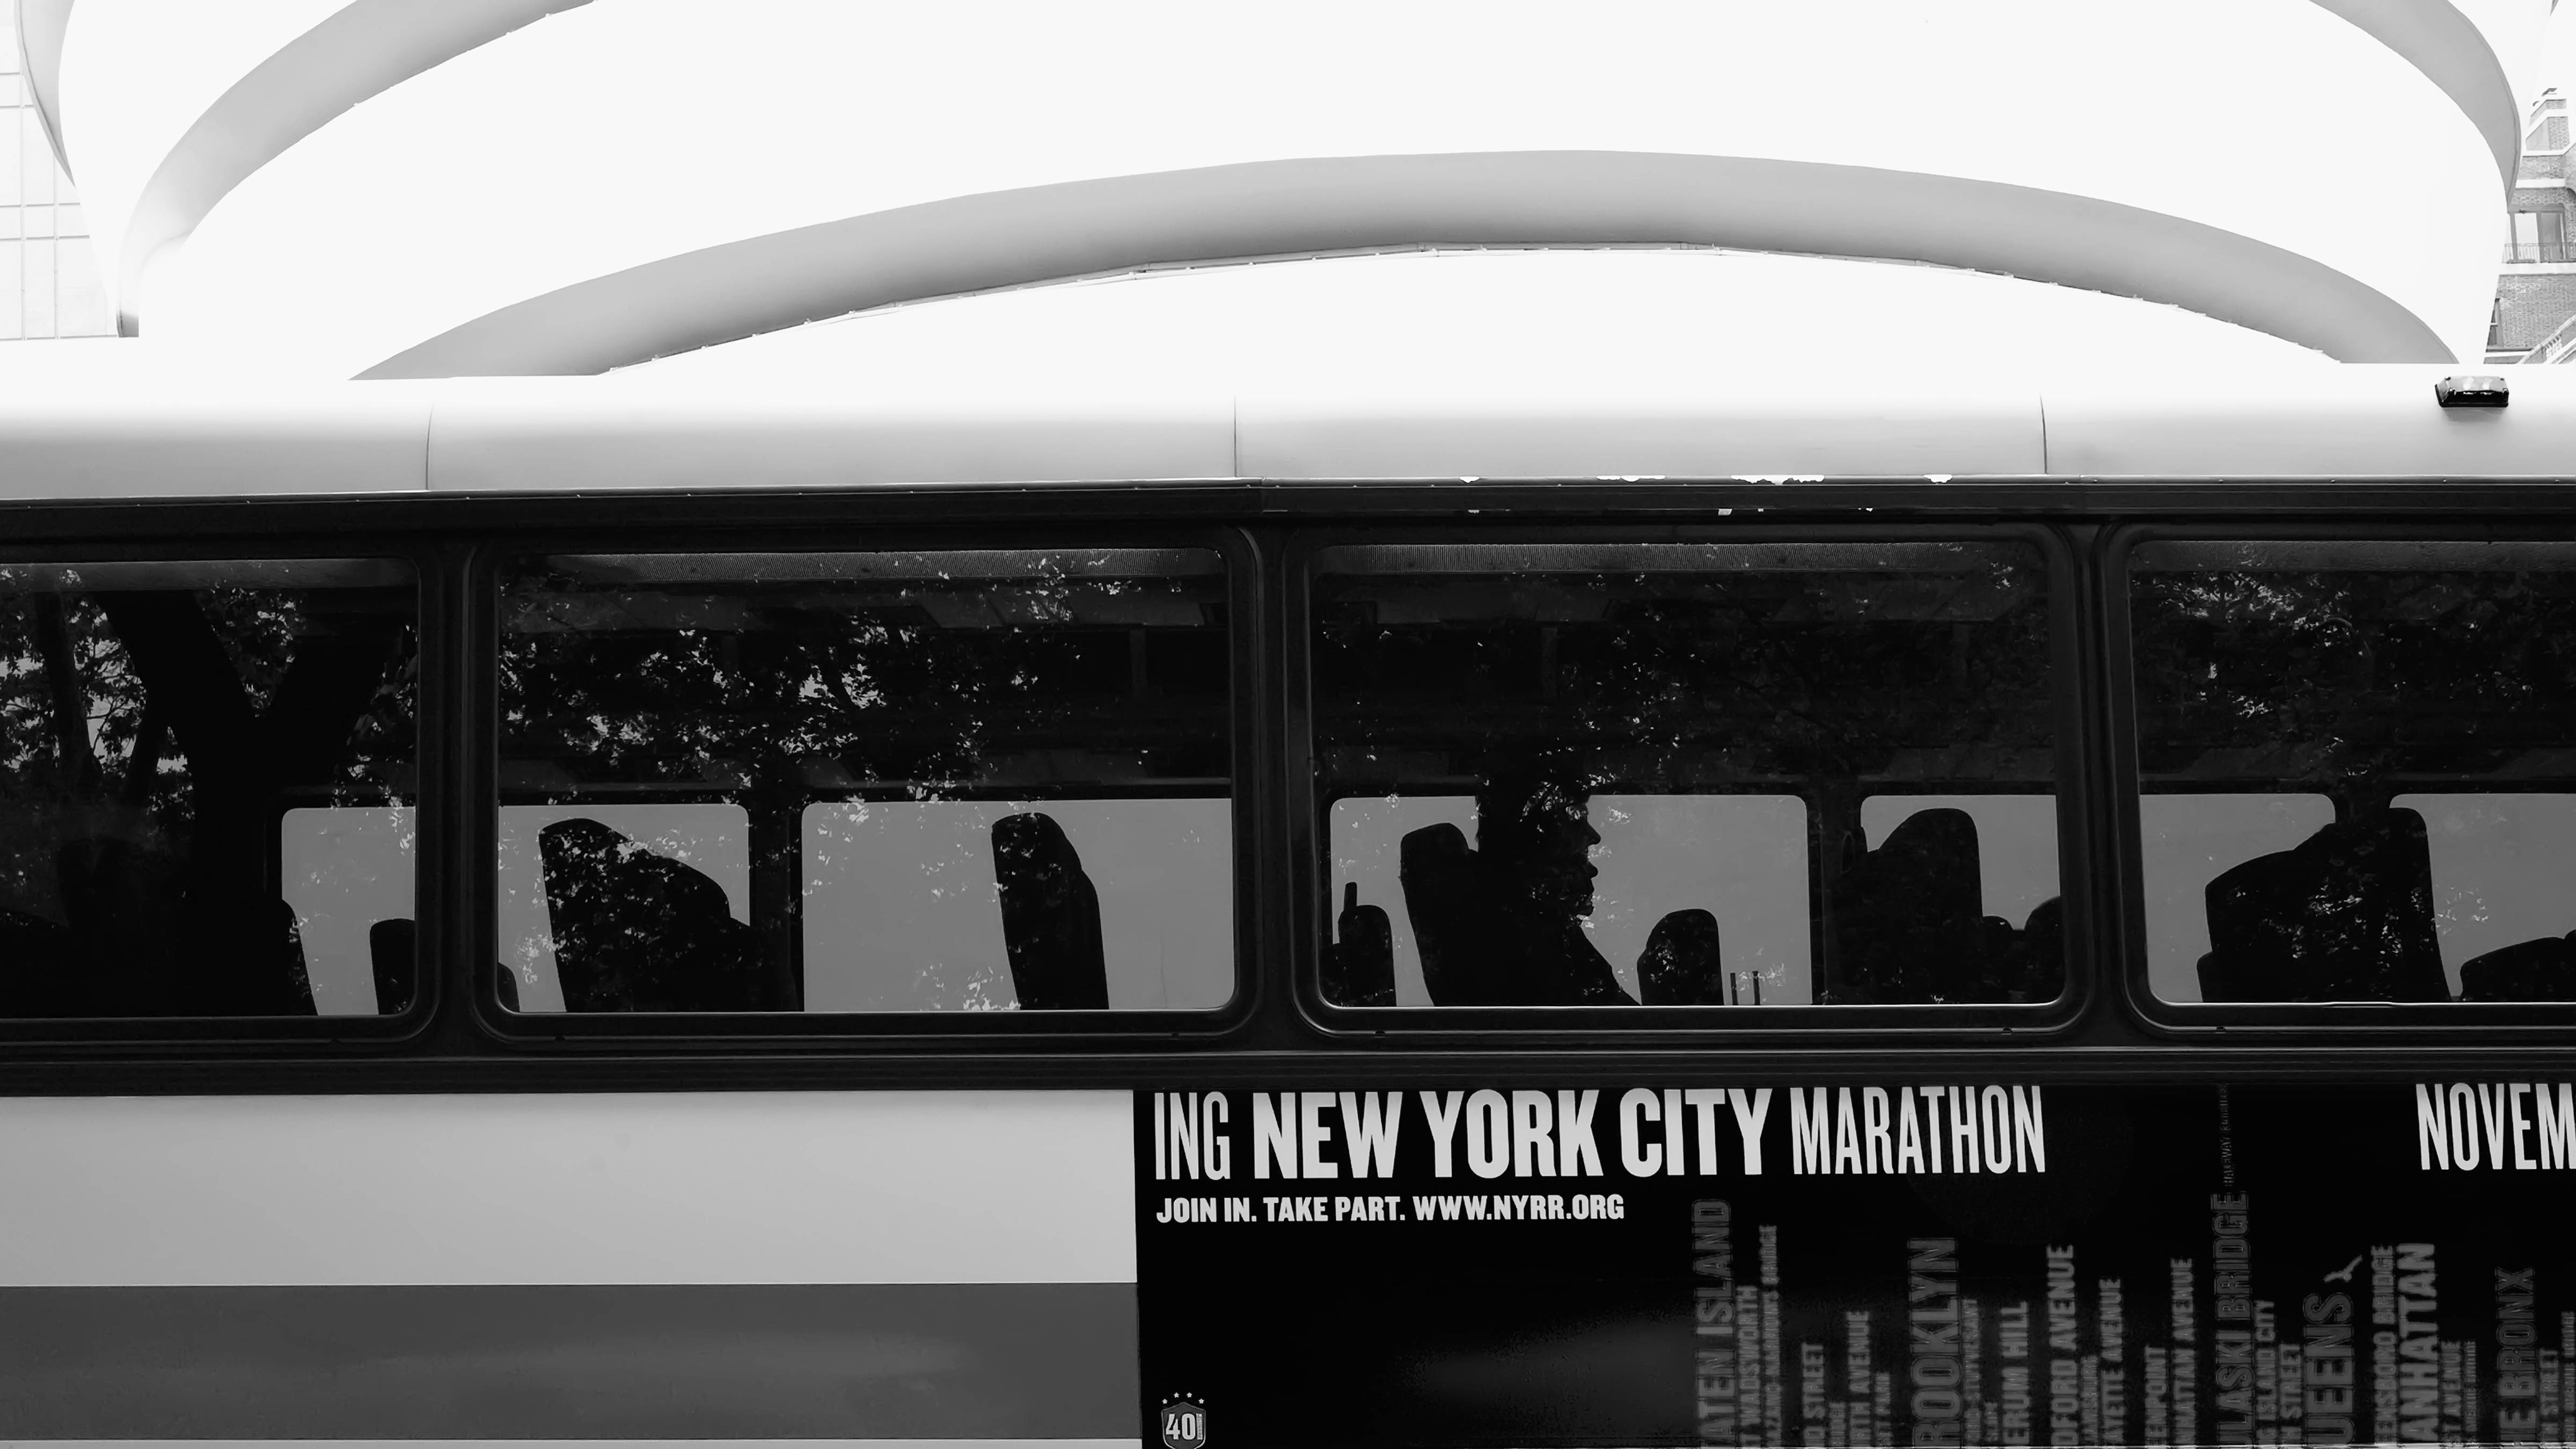 Bus in nyc photo